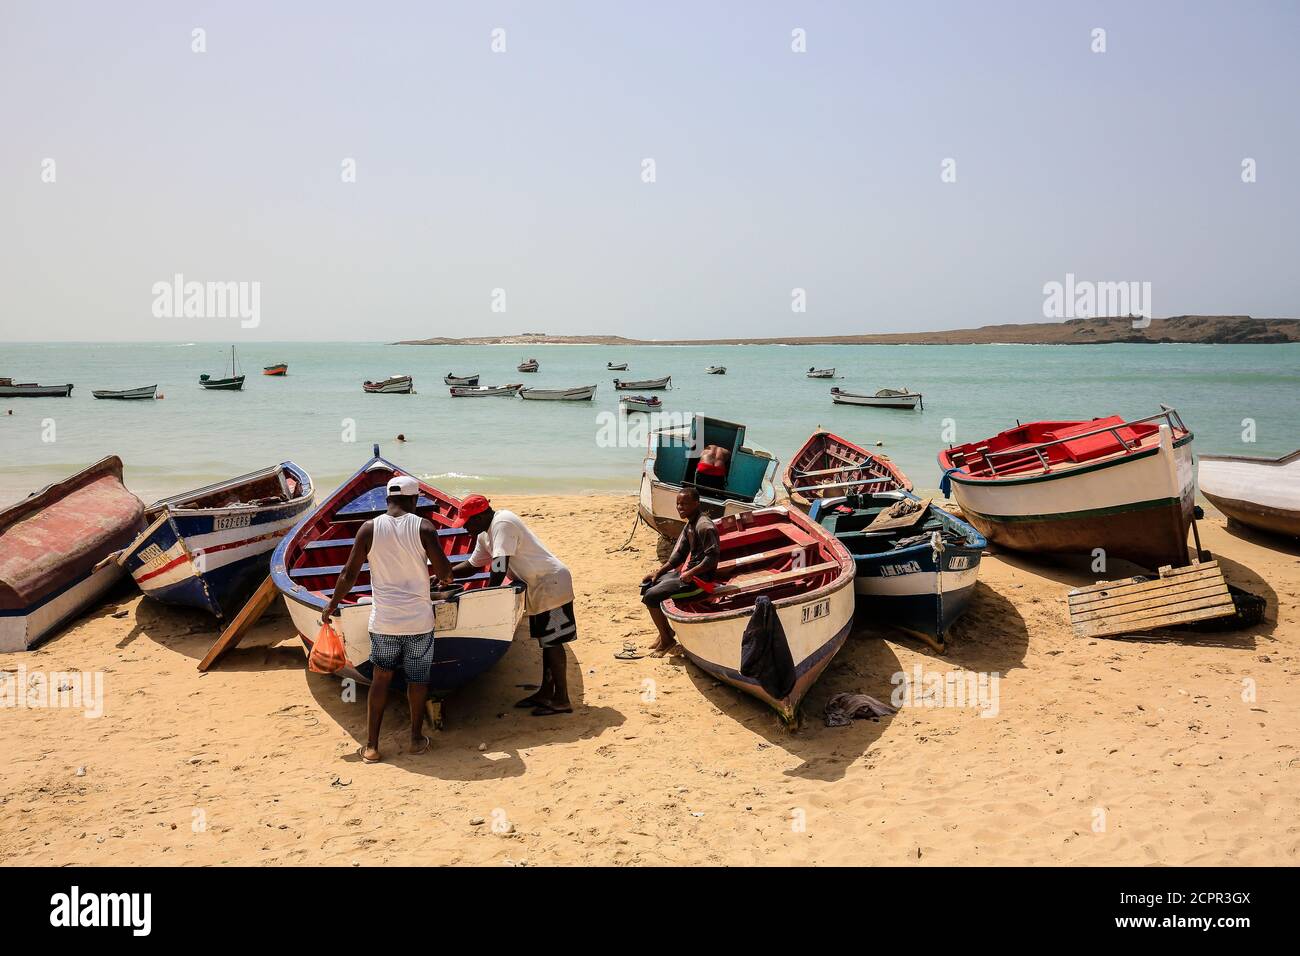 Cape Verde Indigenous High Resolution Stock Photography and Images - Alamy